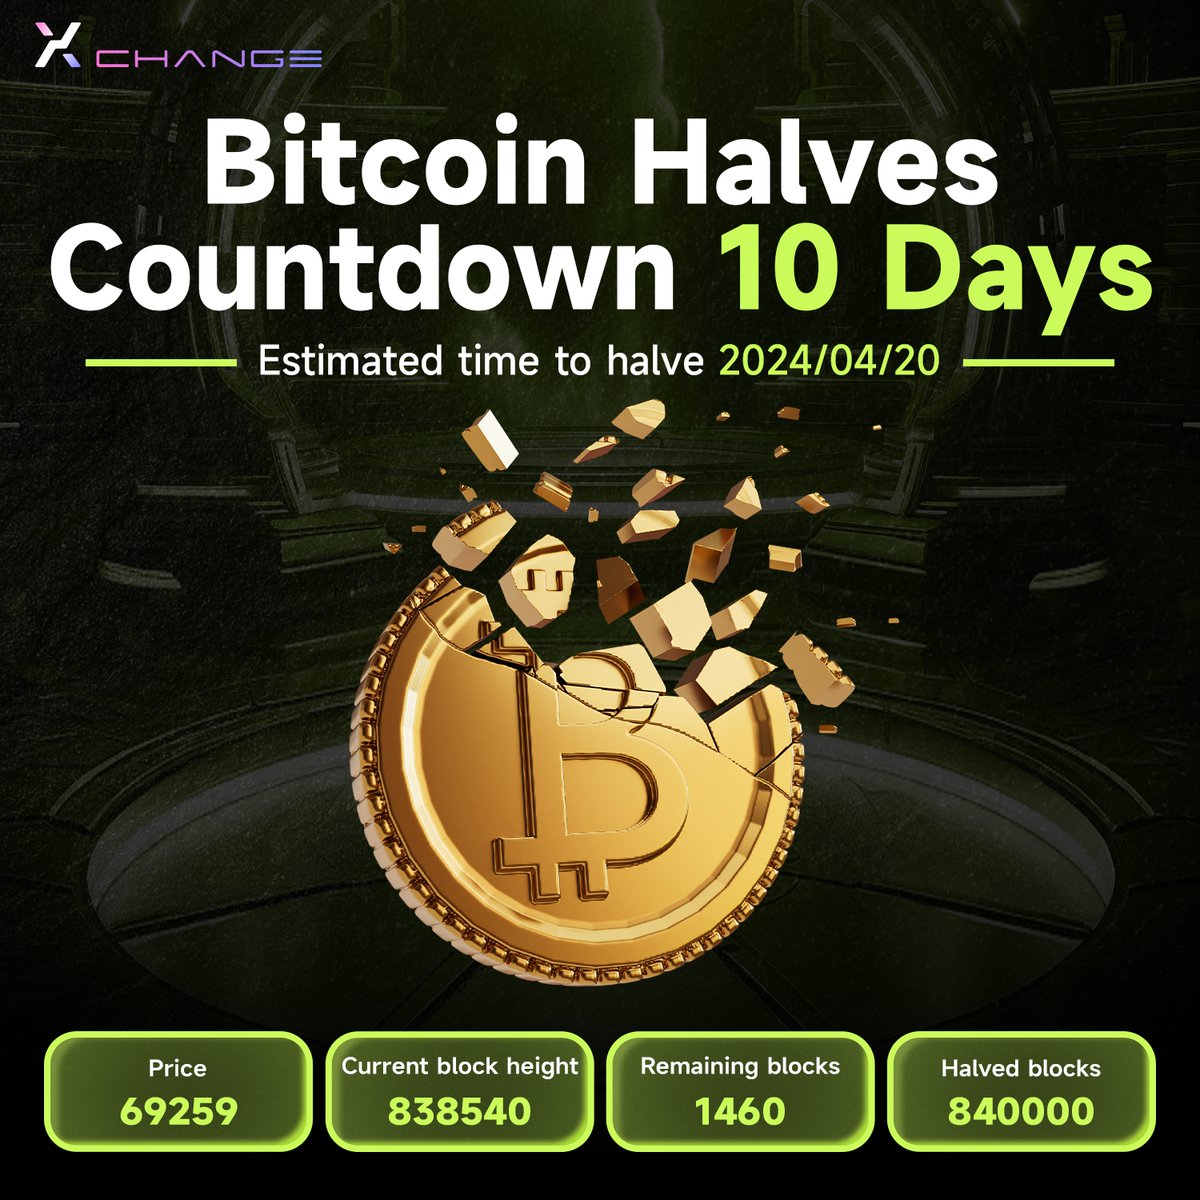 𝐈𝐭'𝐬 𝐚𝐥𝐦𝐨𝐬𝐭 𝐡𝐞𝐫𝐞 Only 10 days left until the halving💸